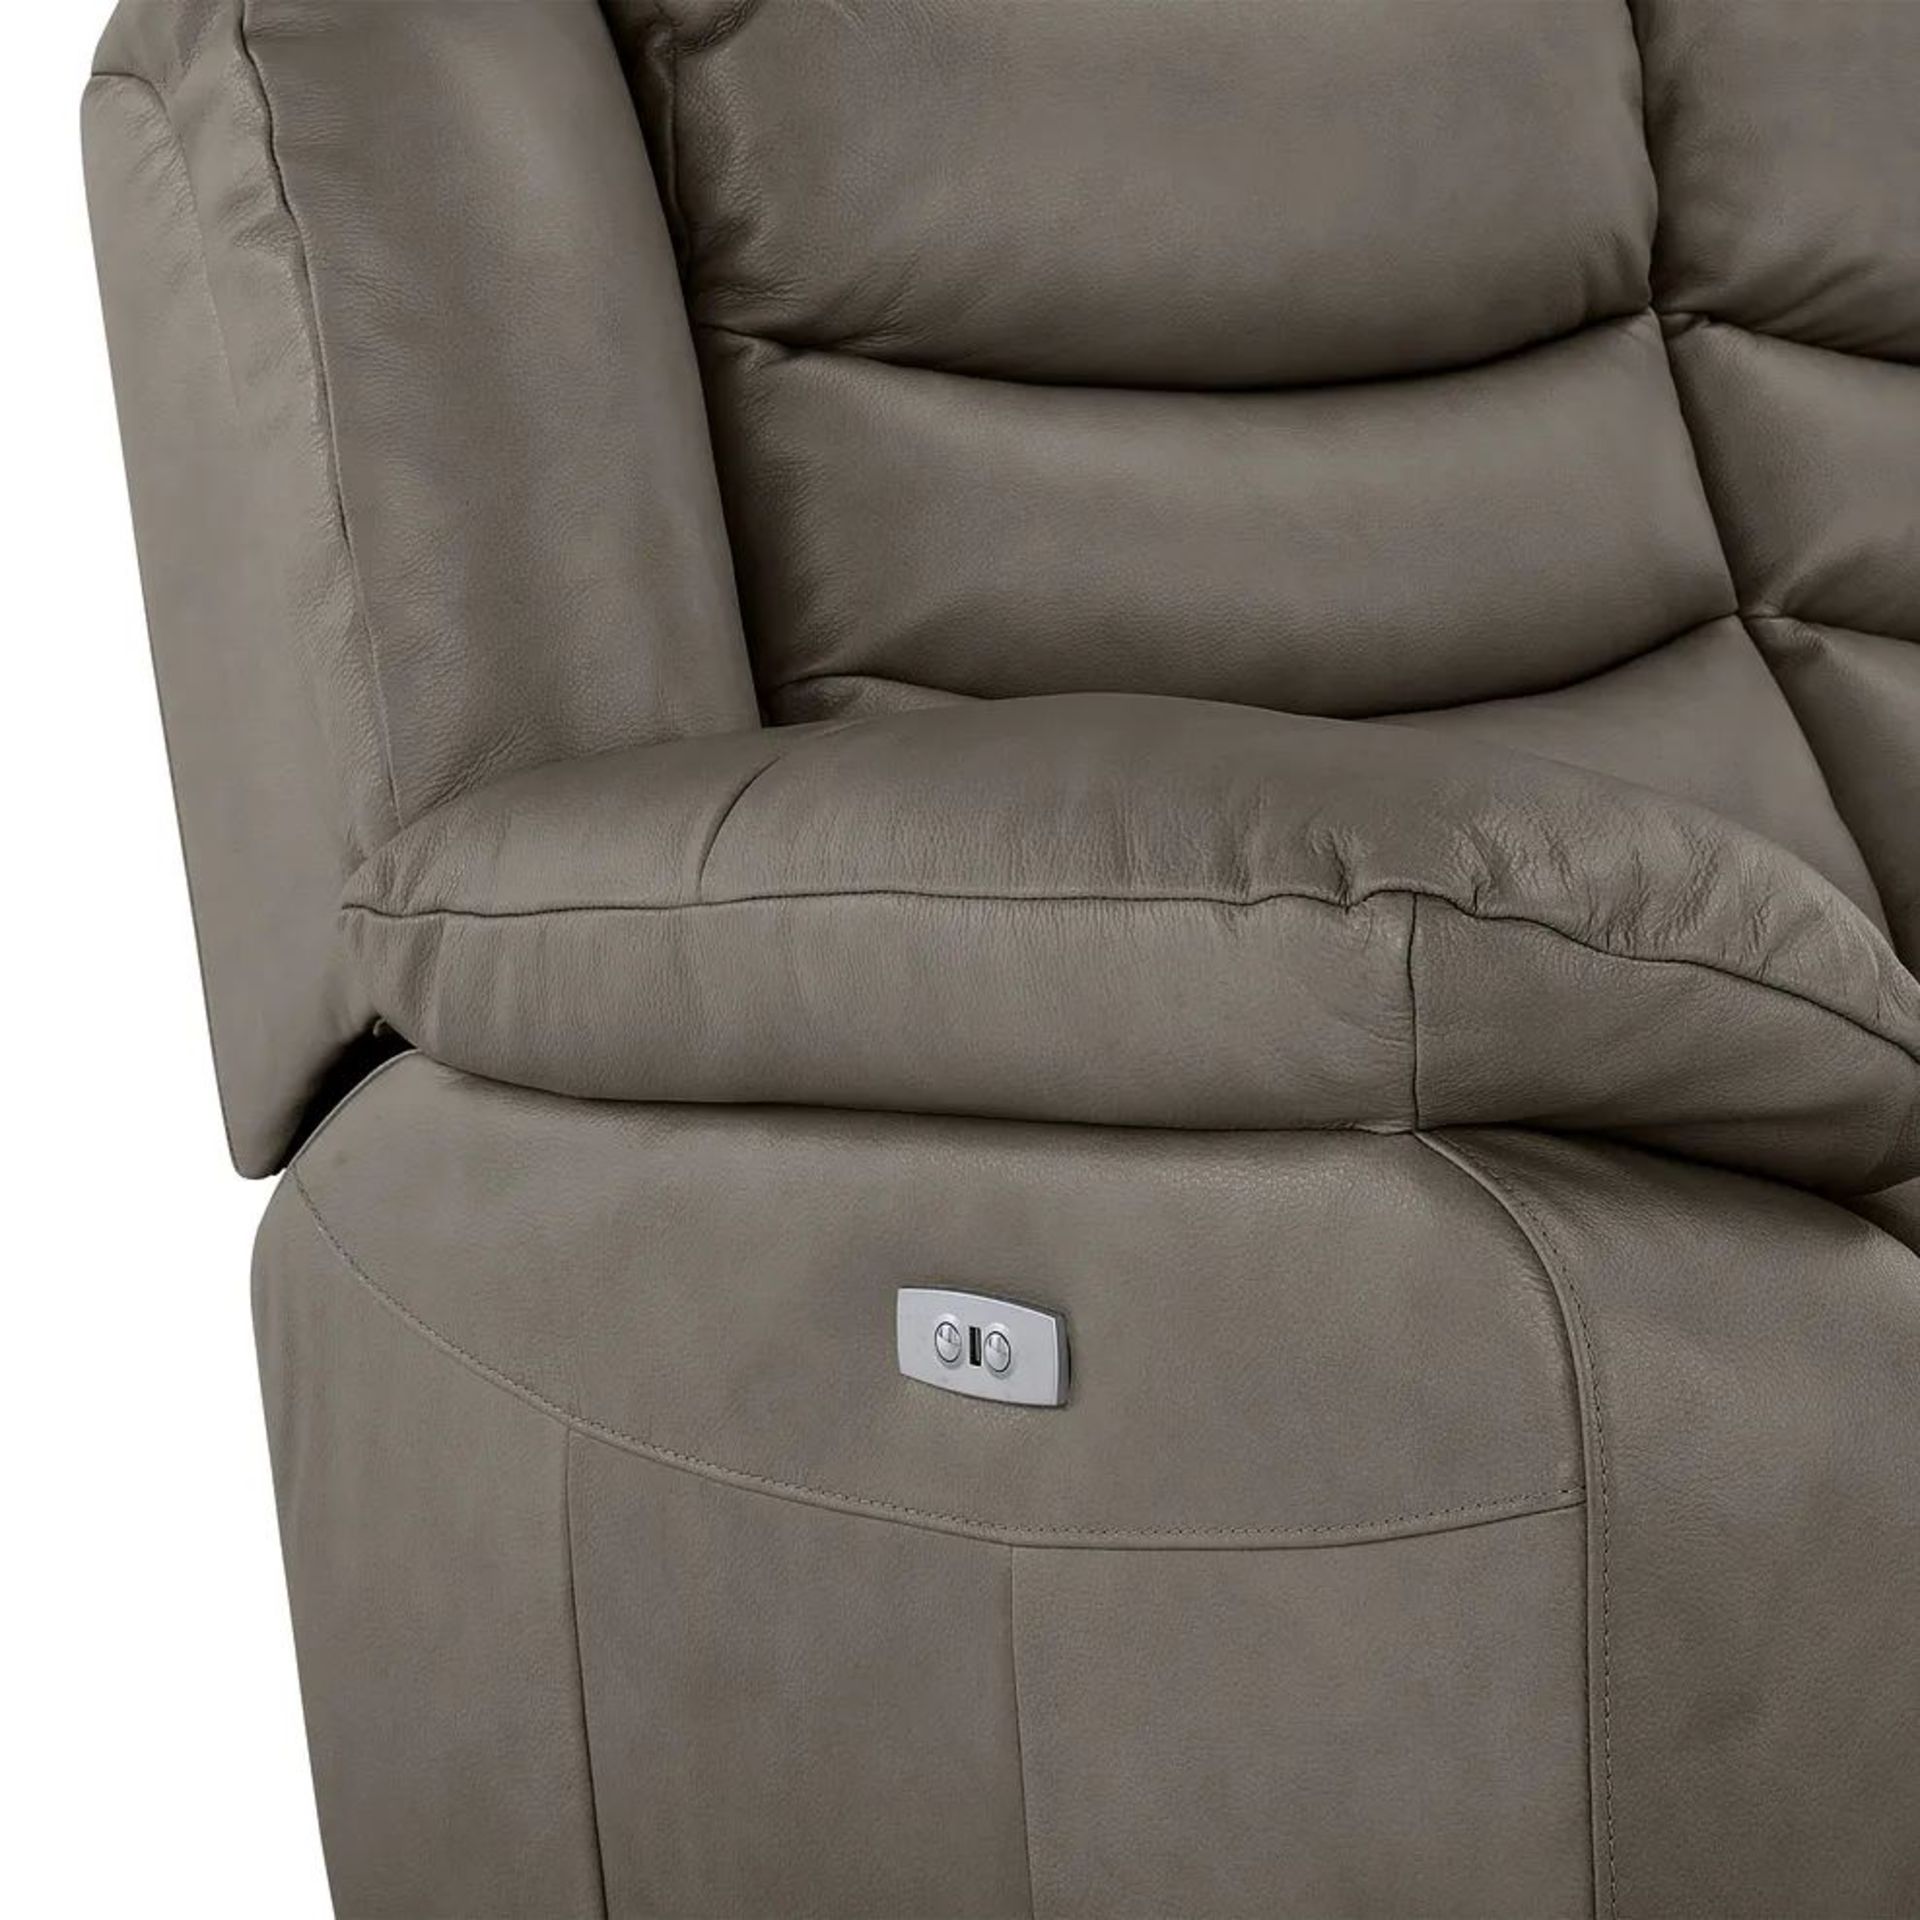 BRAND NEW MARLOW 3 Seater Electric Recliner Sofa - DARK GREY LEATHER. RRP £1849. Our Marlow - Image 11 of 11